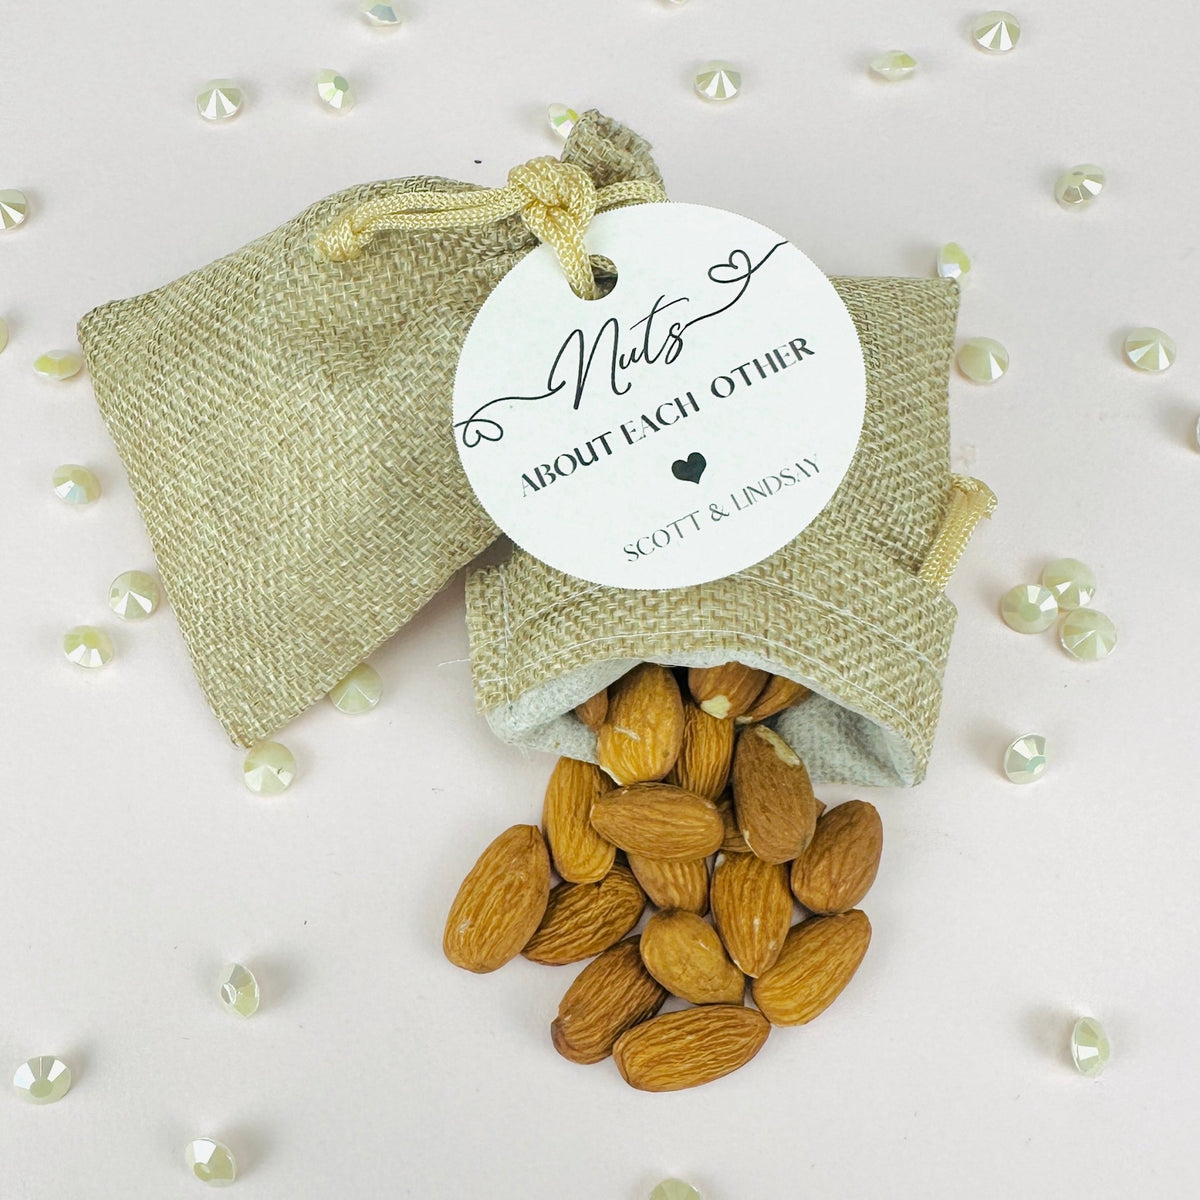 Nuts About Each Other Burlap Bag - Forever Wedding Favors